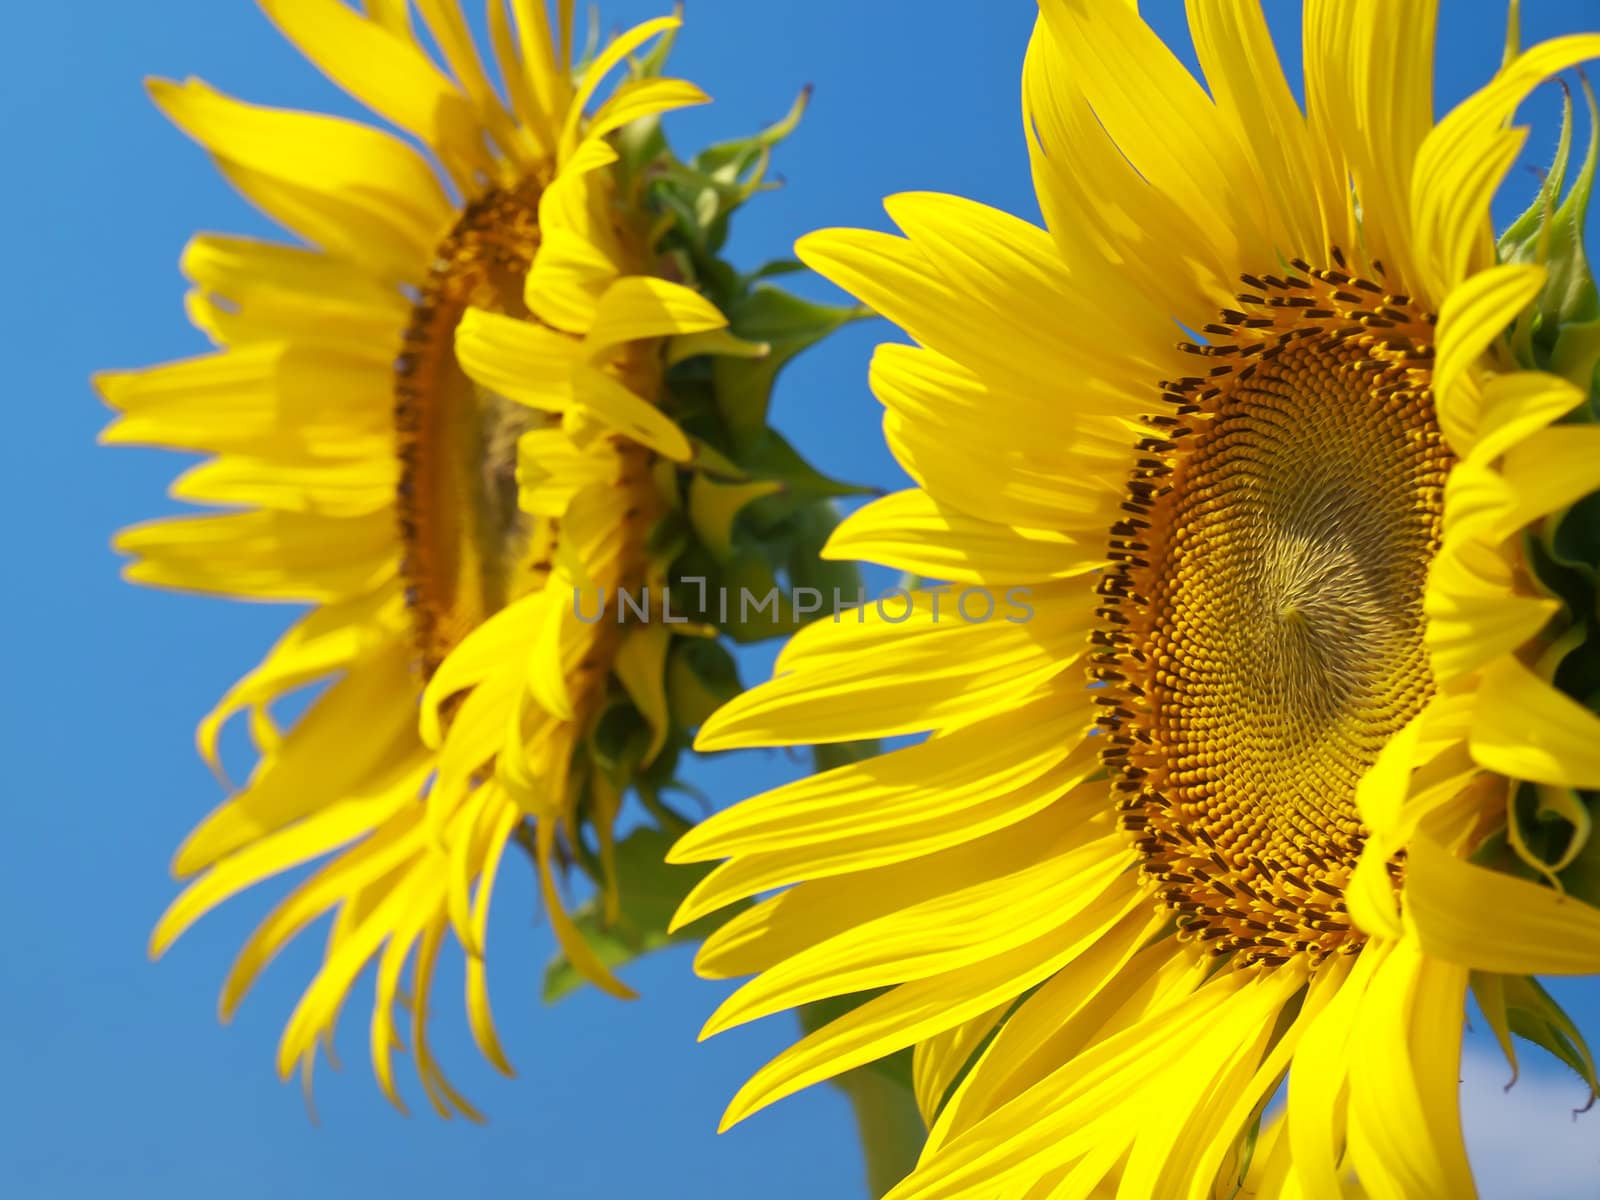 Sunflowers face to the sun with blue sky